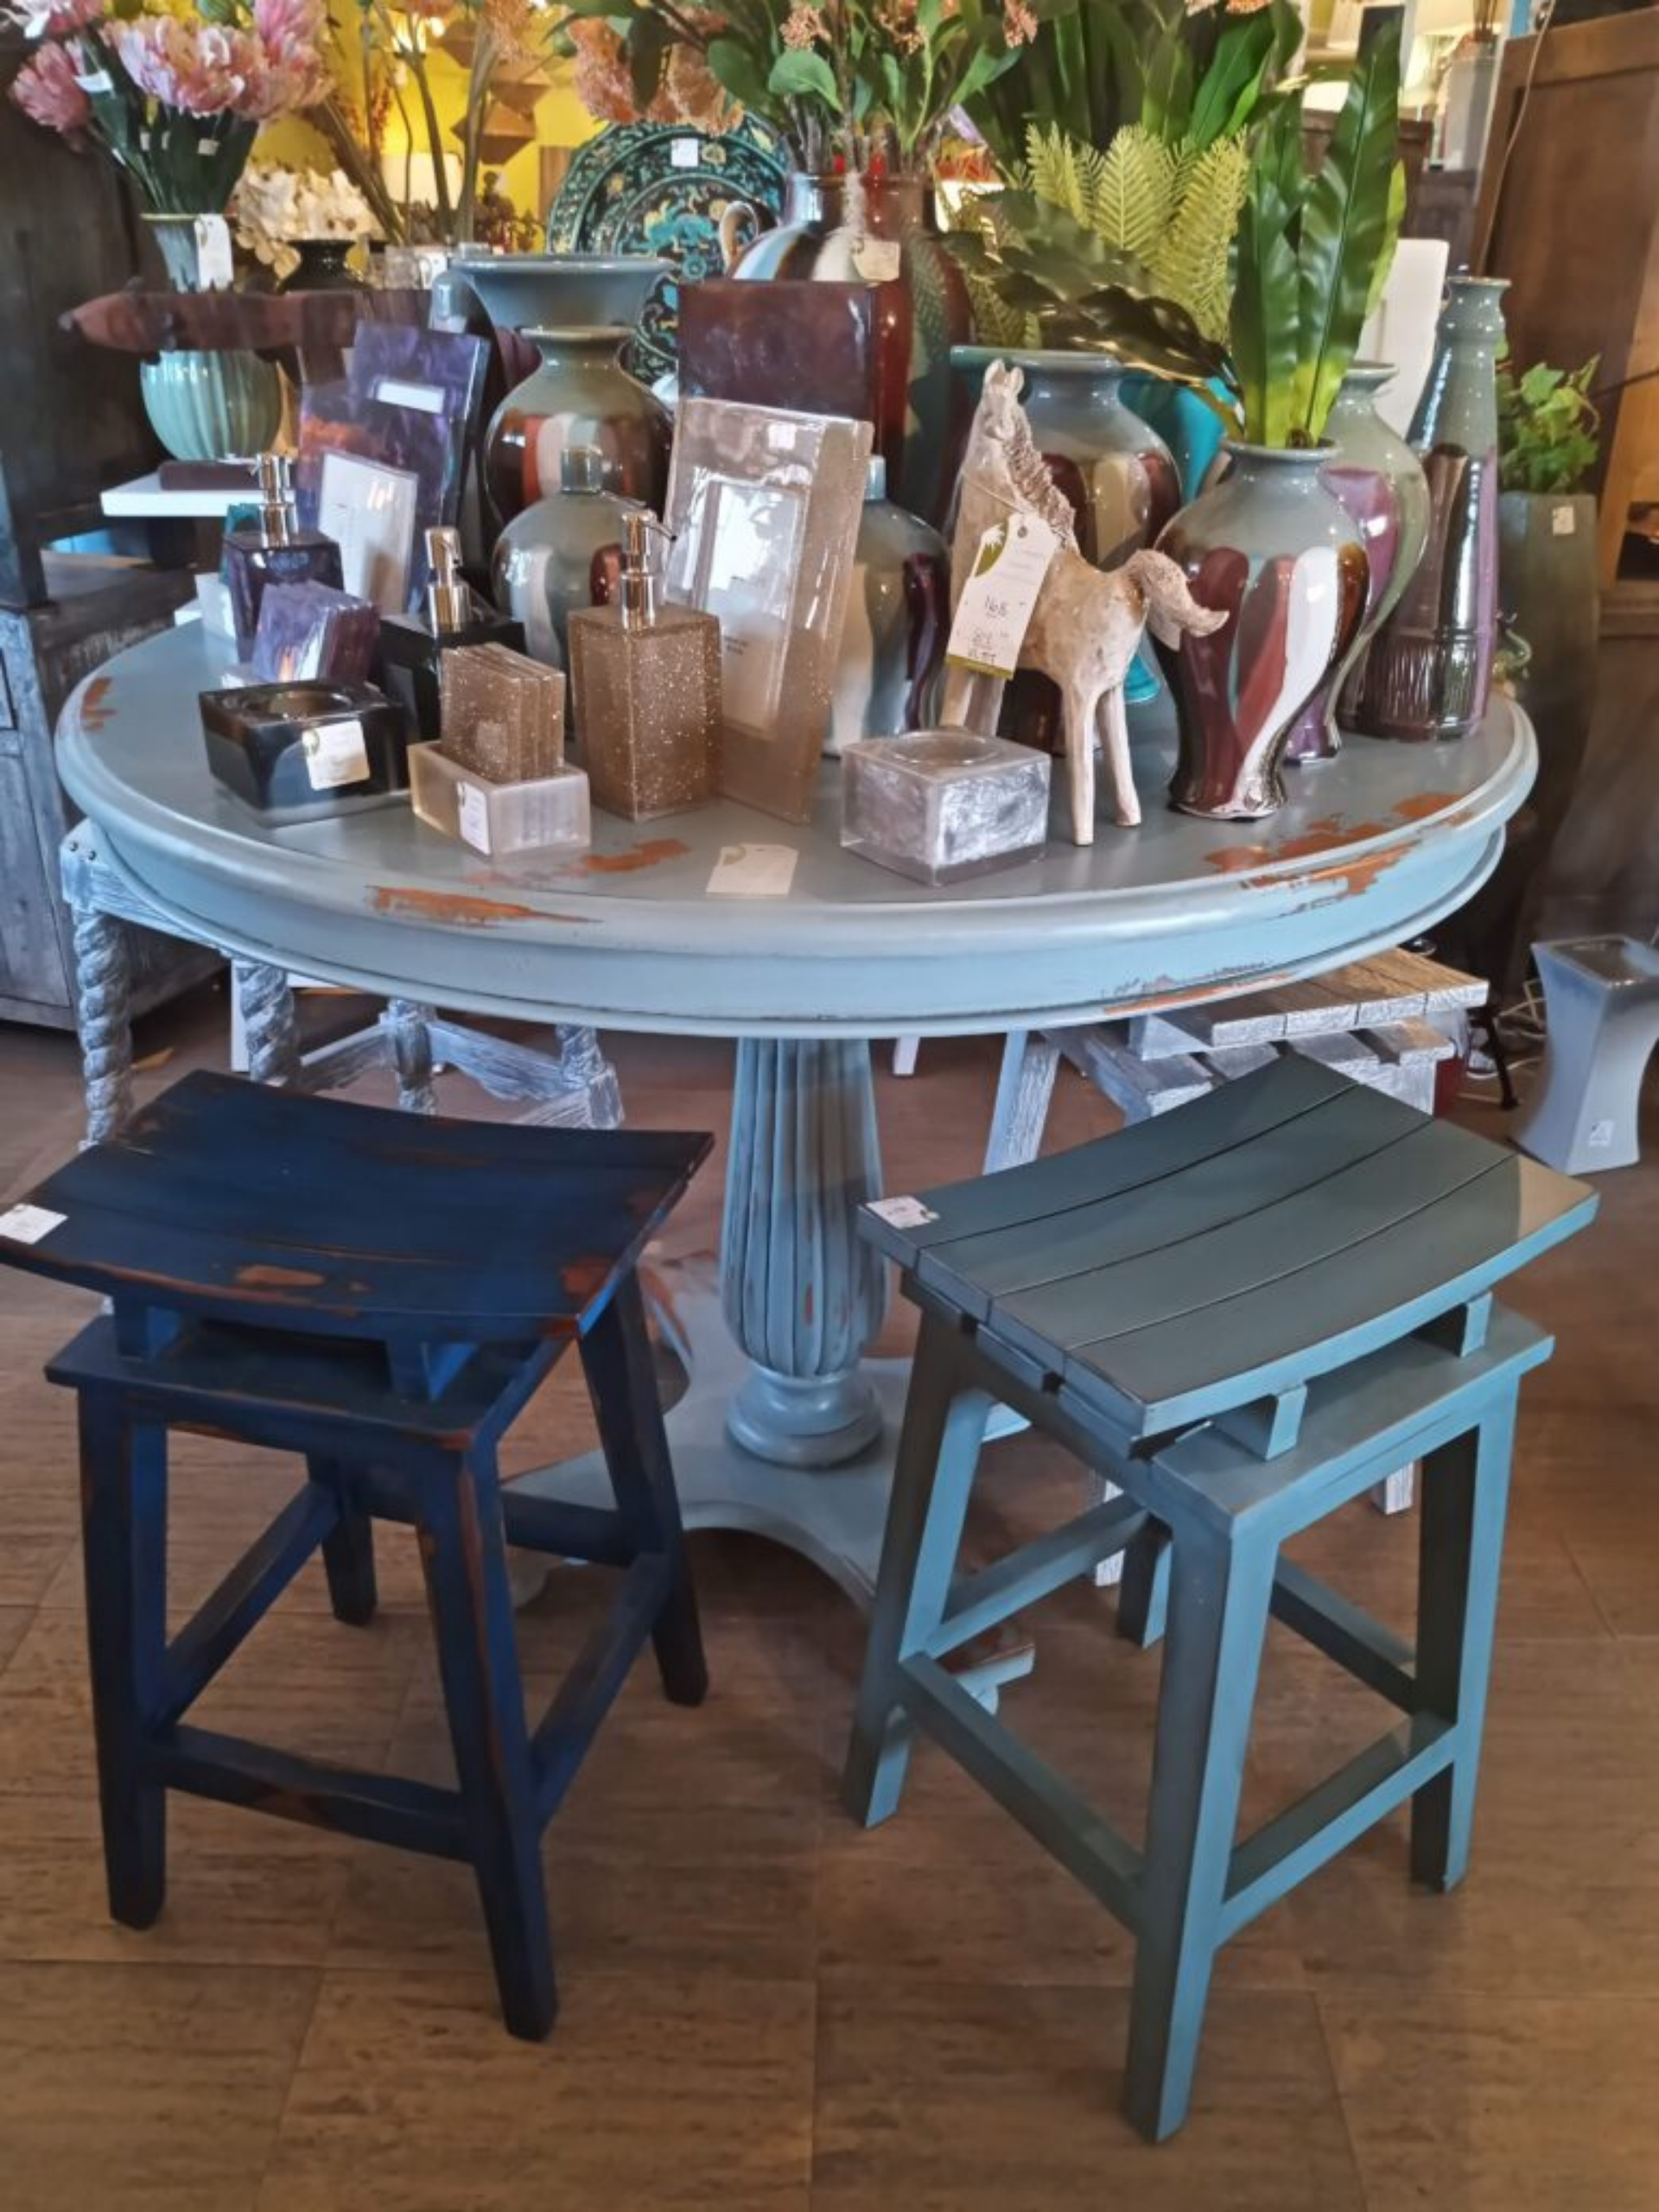 Dynamic Dining Table with Saddle Stools - Counter Height - Ocean Blue